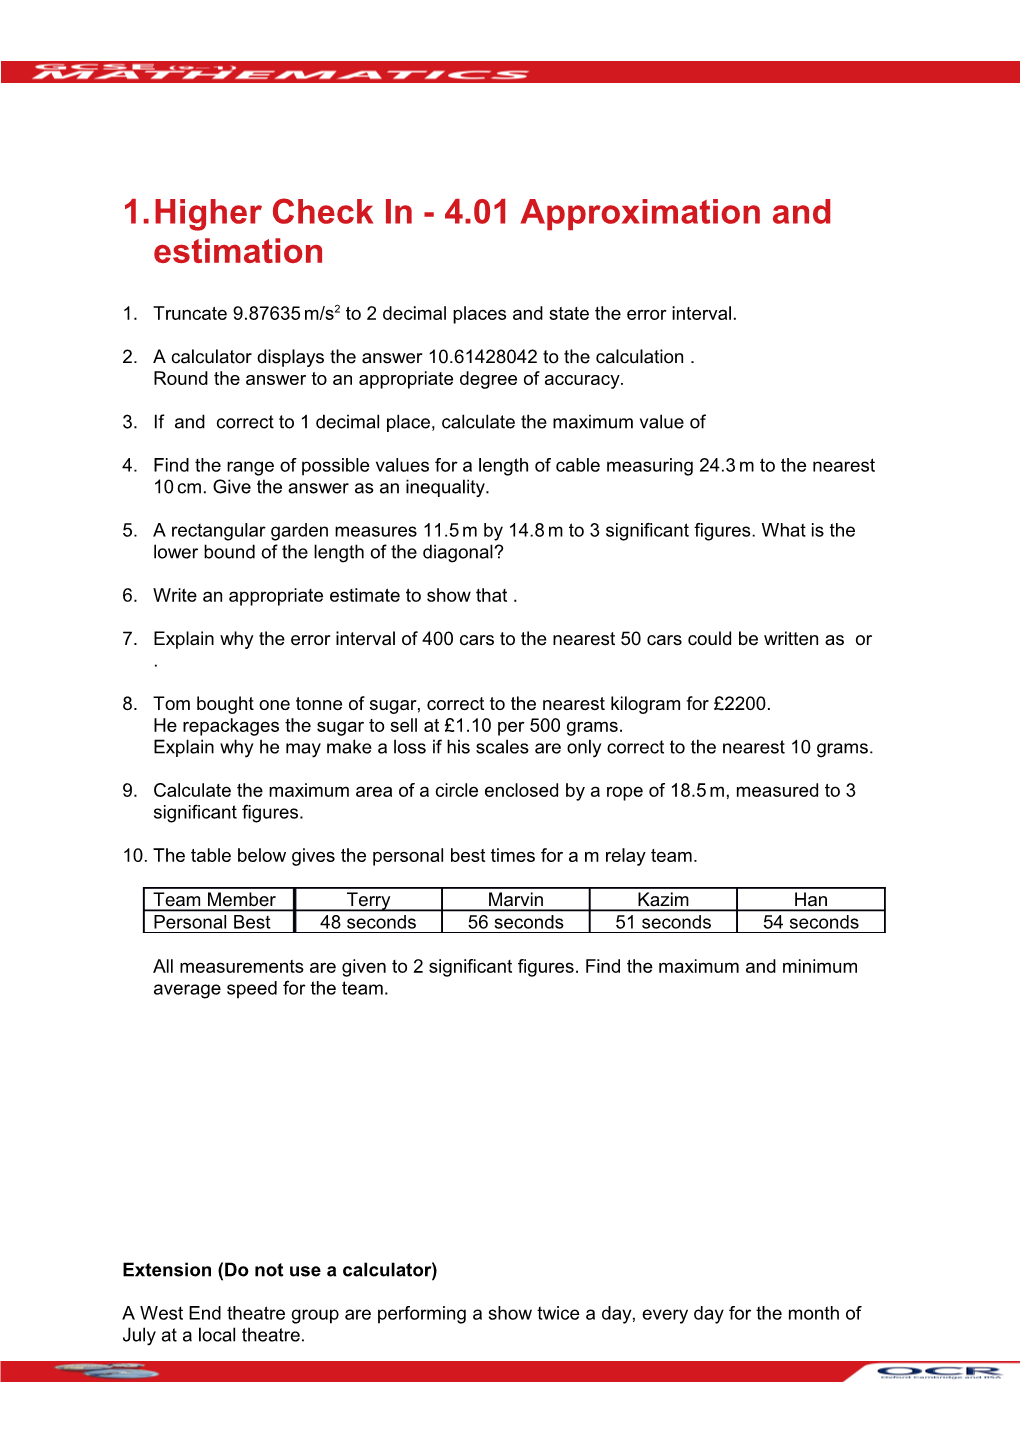 GCSE (9-1) Mathematics Higher Check in - 4.01 Approximation and Estimation